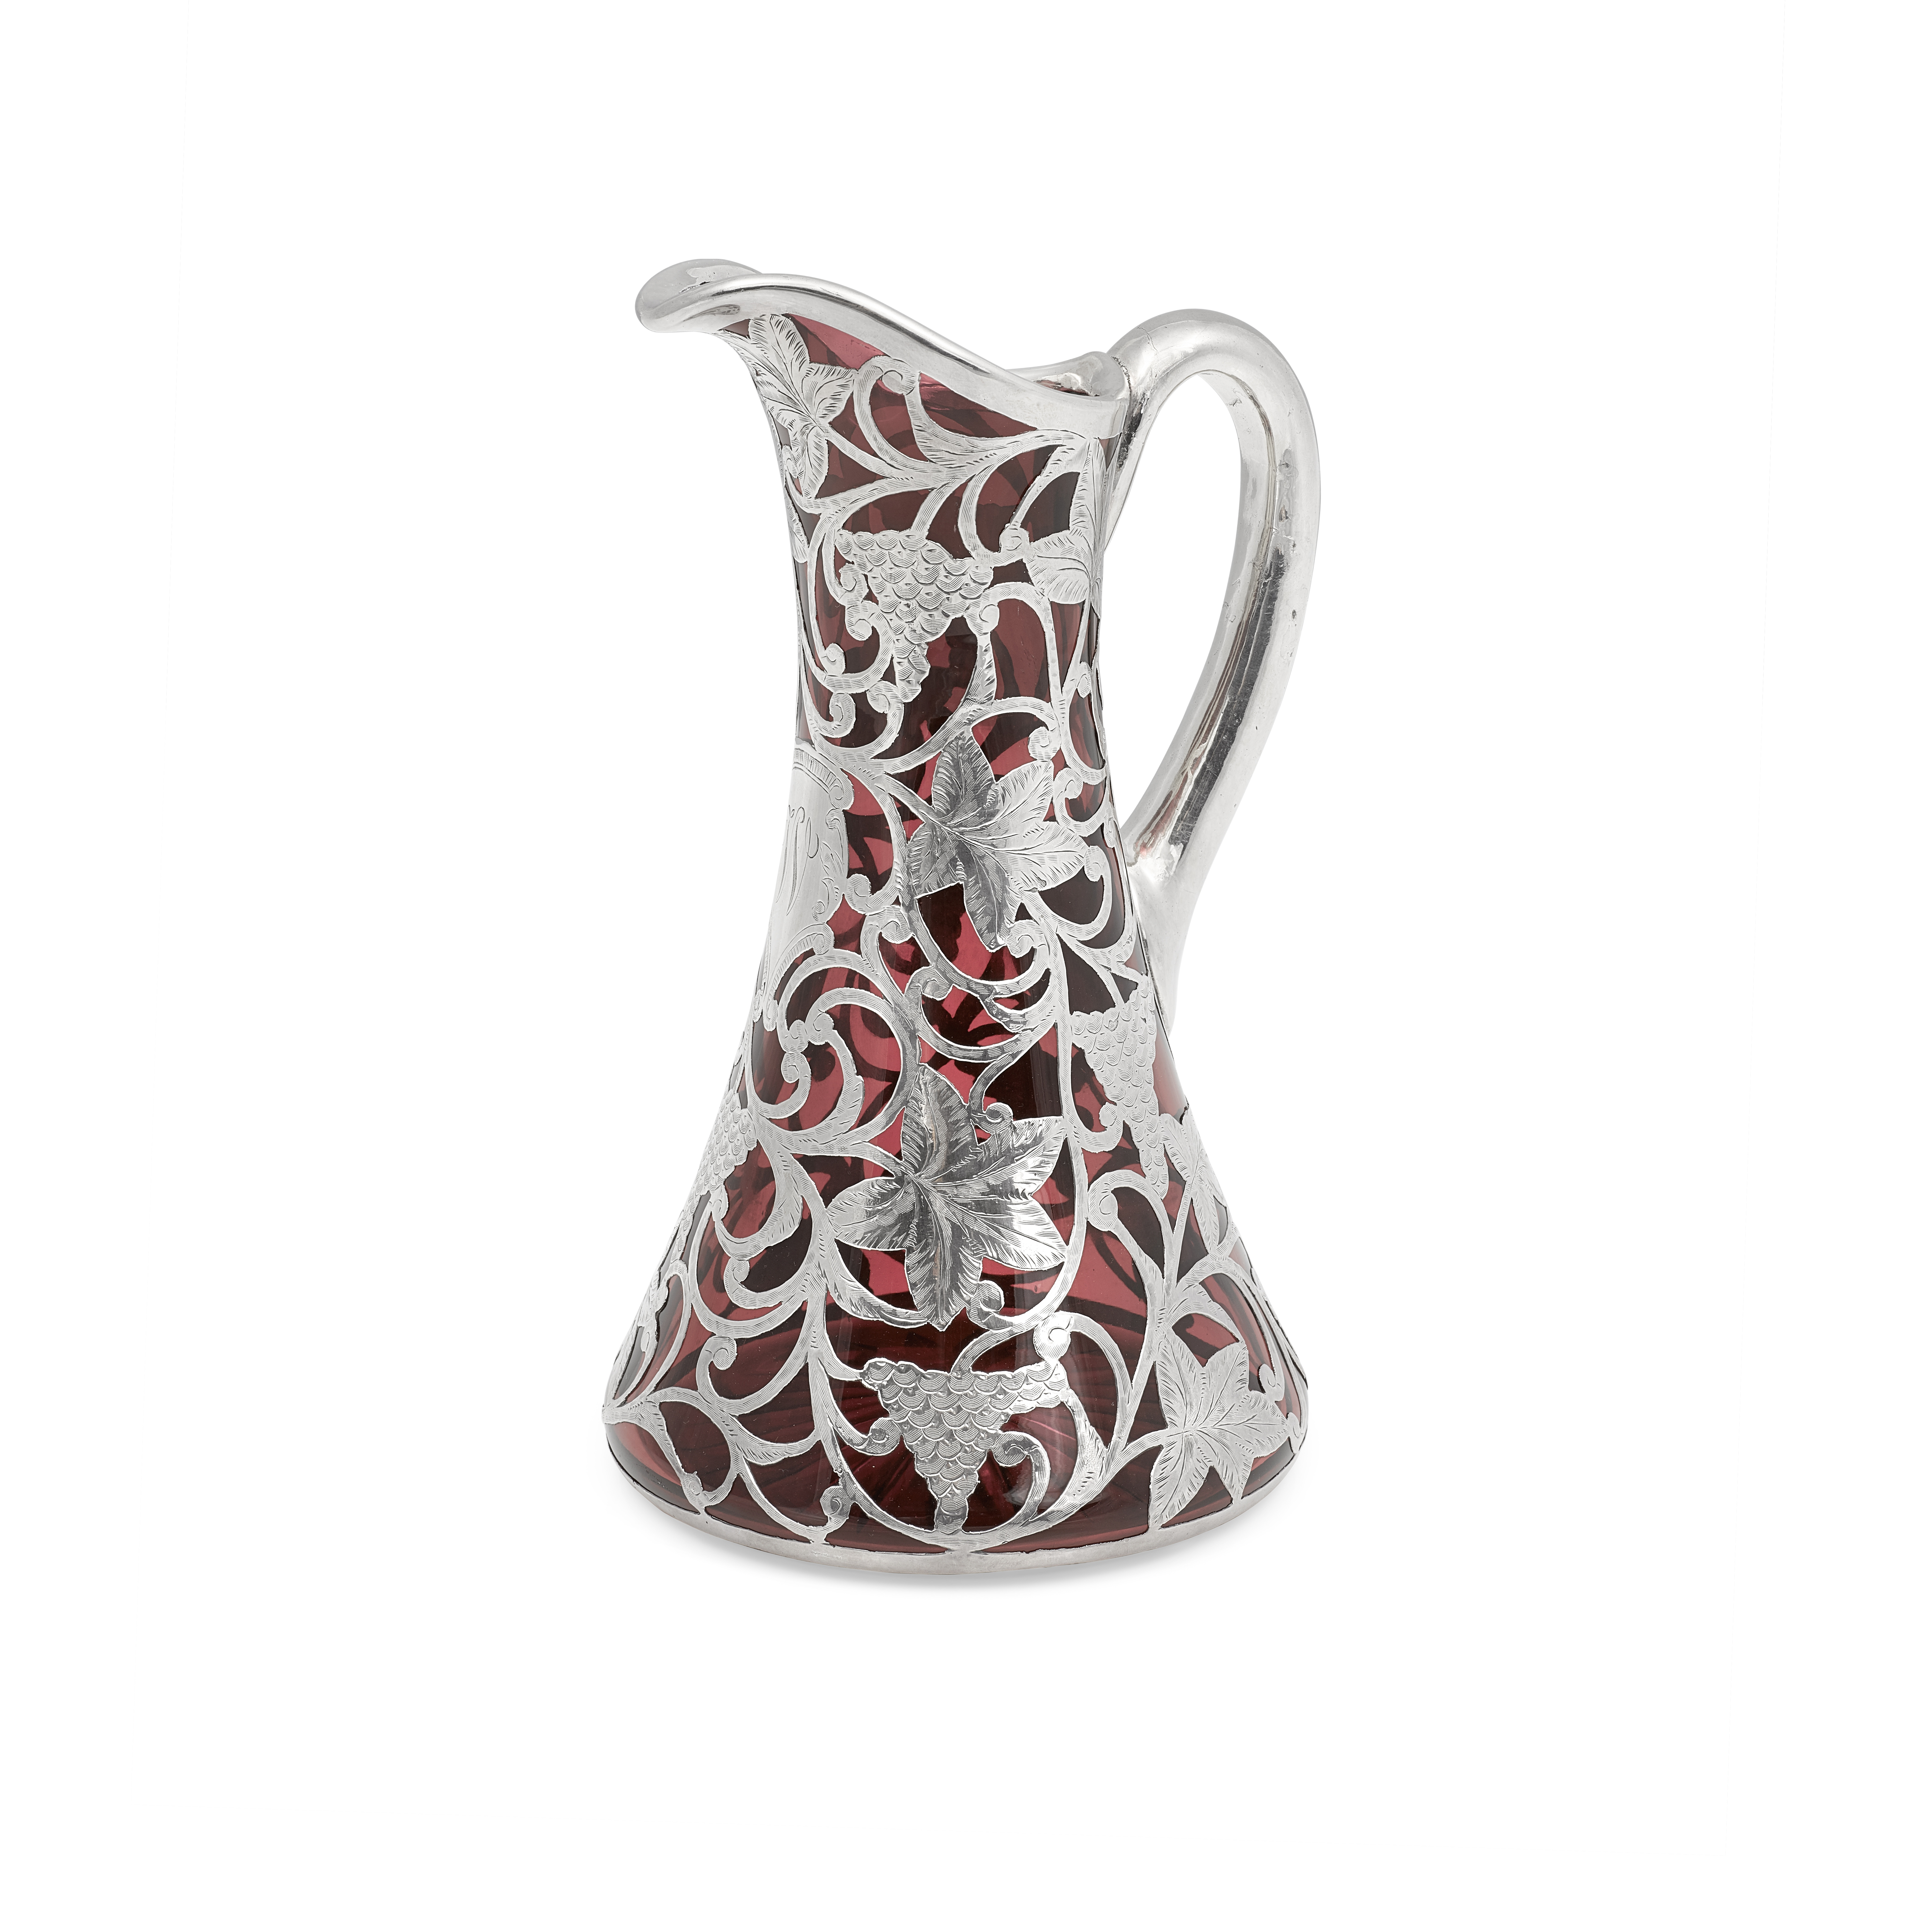 An American glass pitcher with silver overlay early 20th century